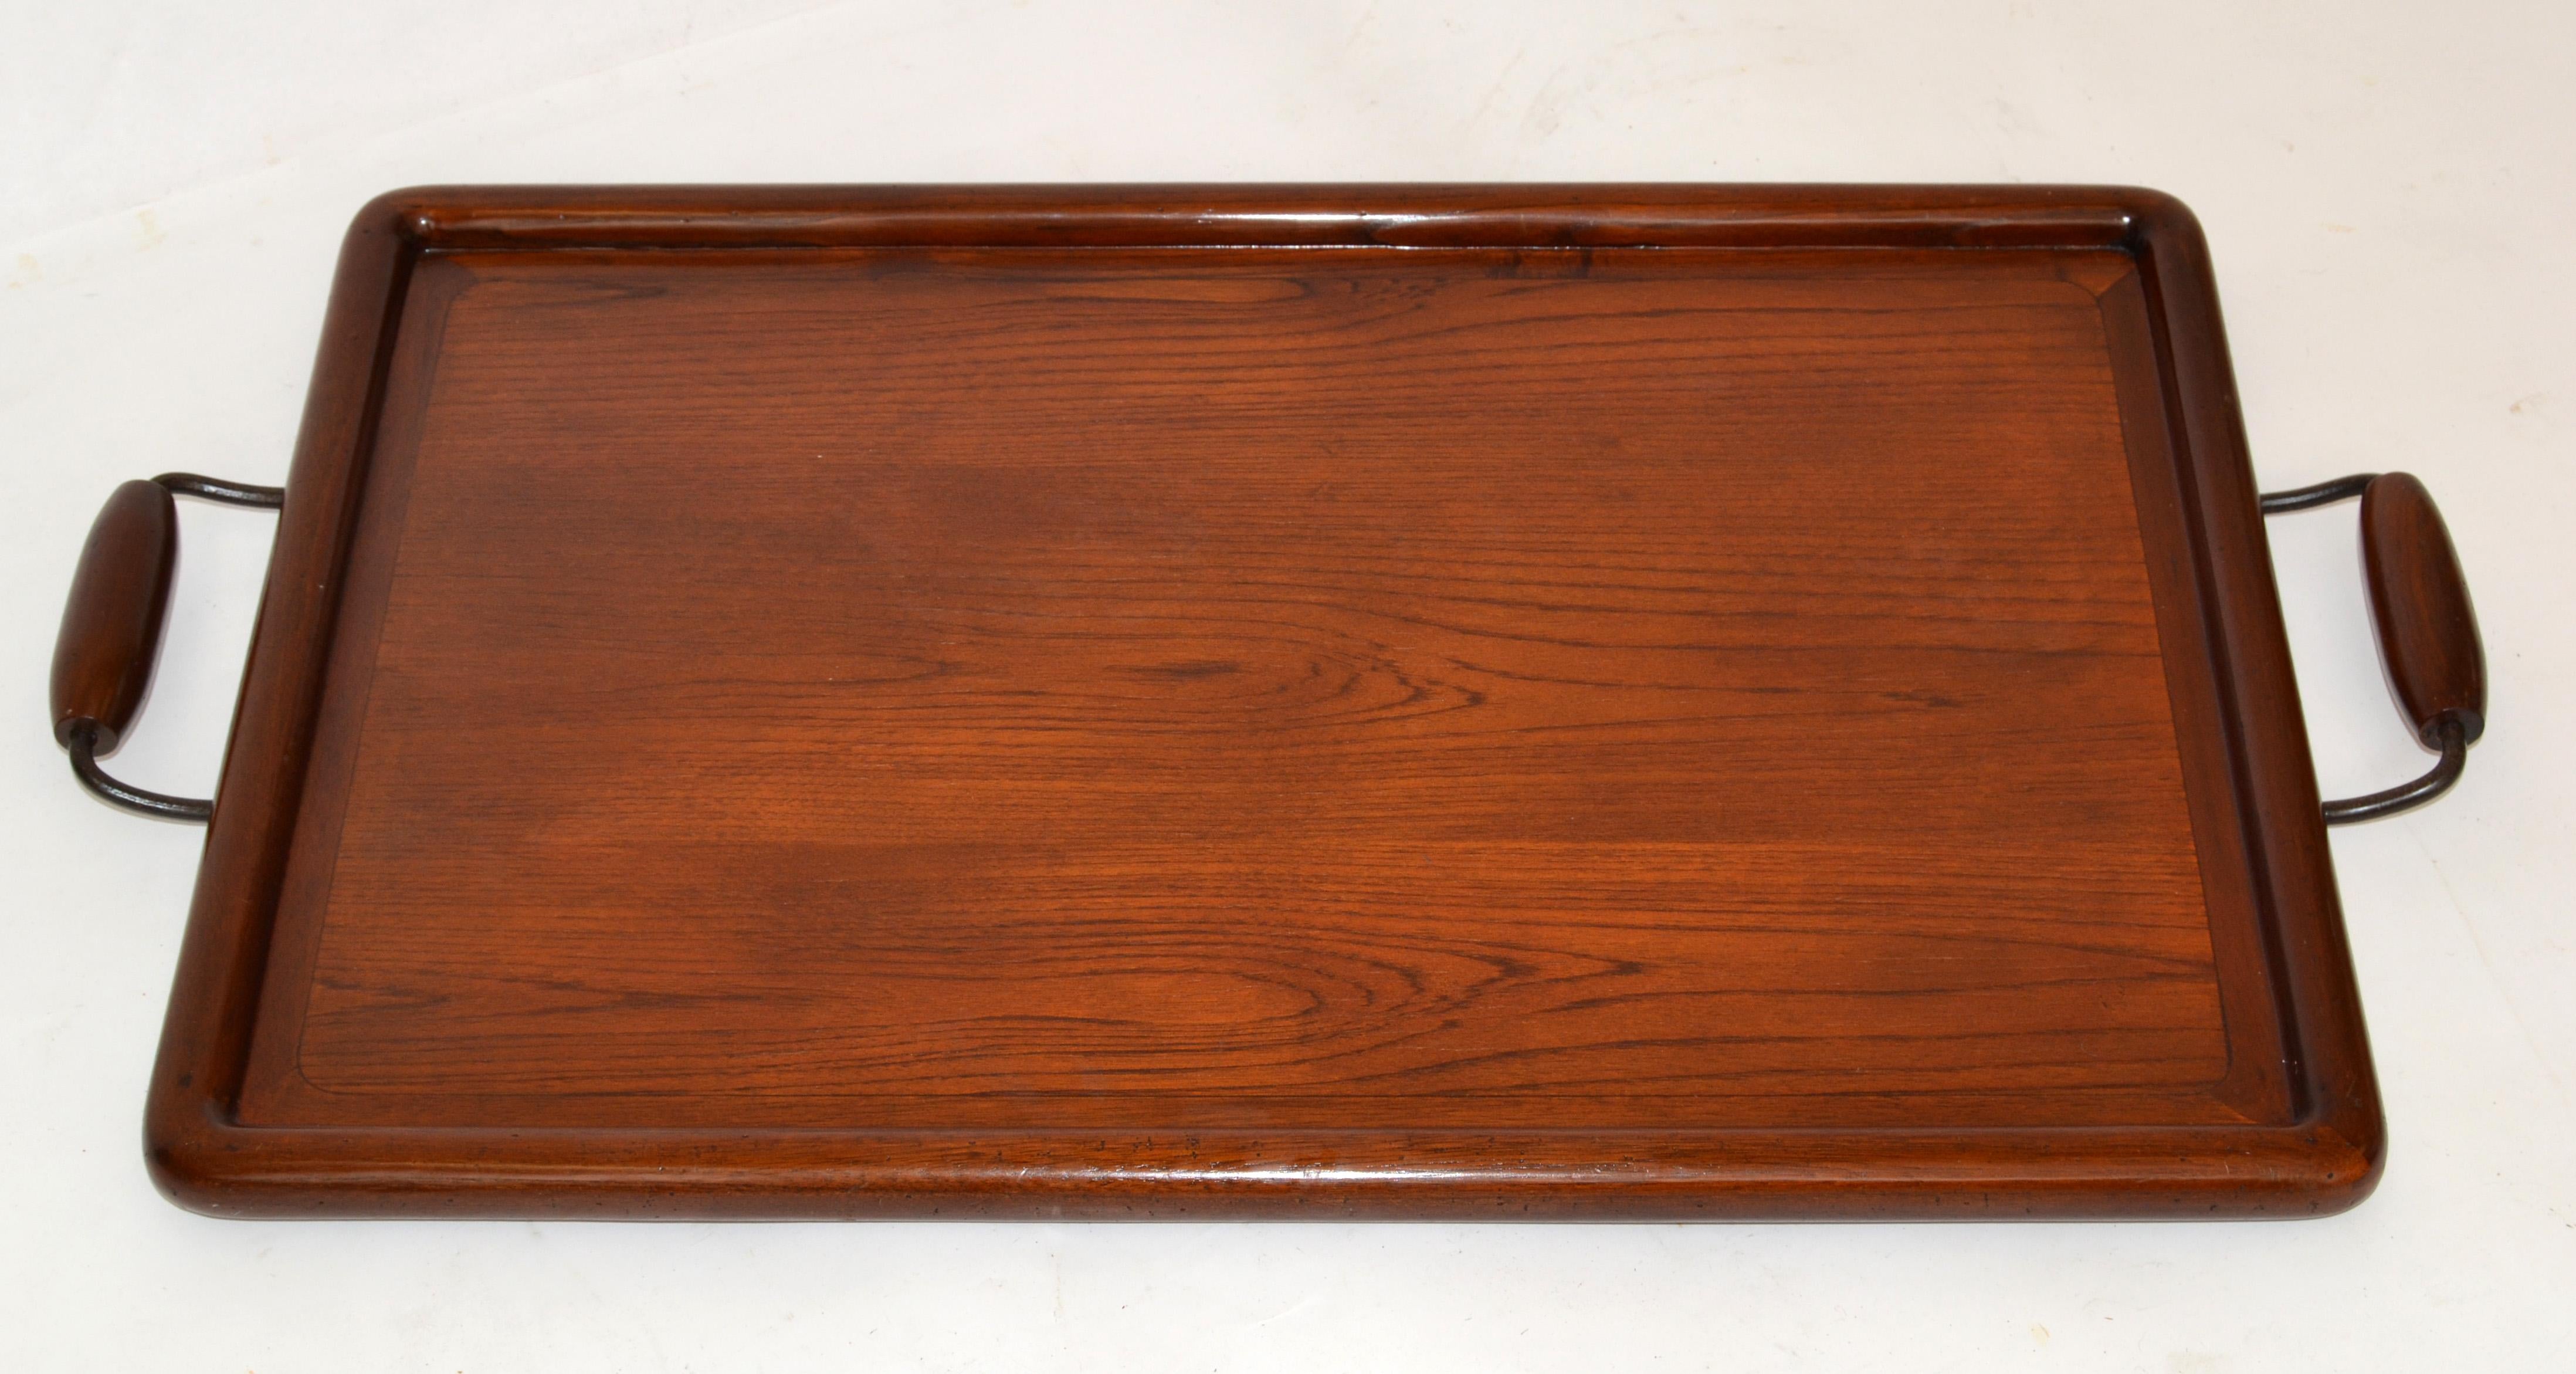 American organic modern handcrafted oak hardwood & steel decorative footed serving tray.
Note the lacquered turned Wood Handles, easy to carry and exceptional crafted.
Note the beautiful wood grain.
In original good vintage condition with some